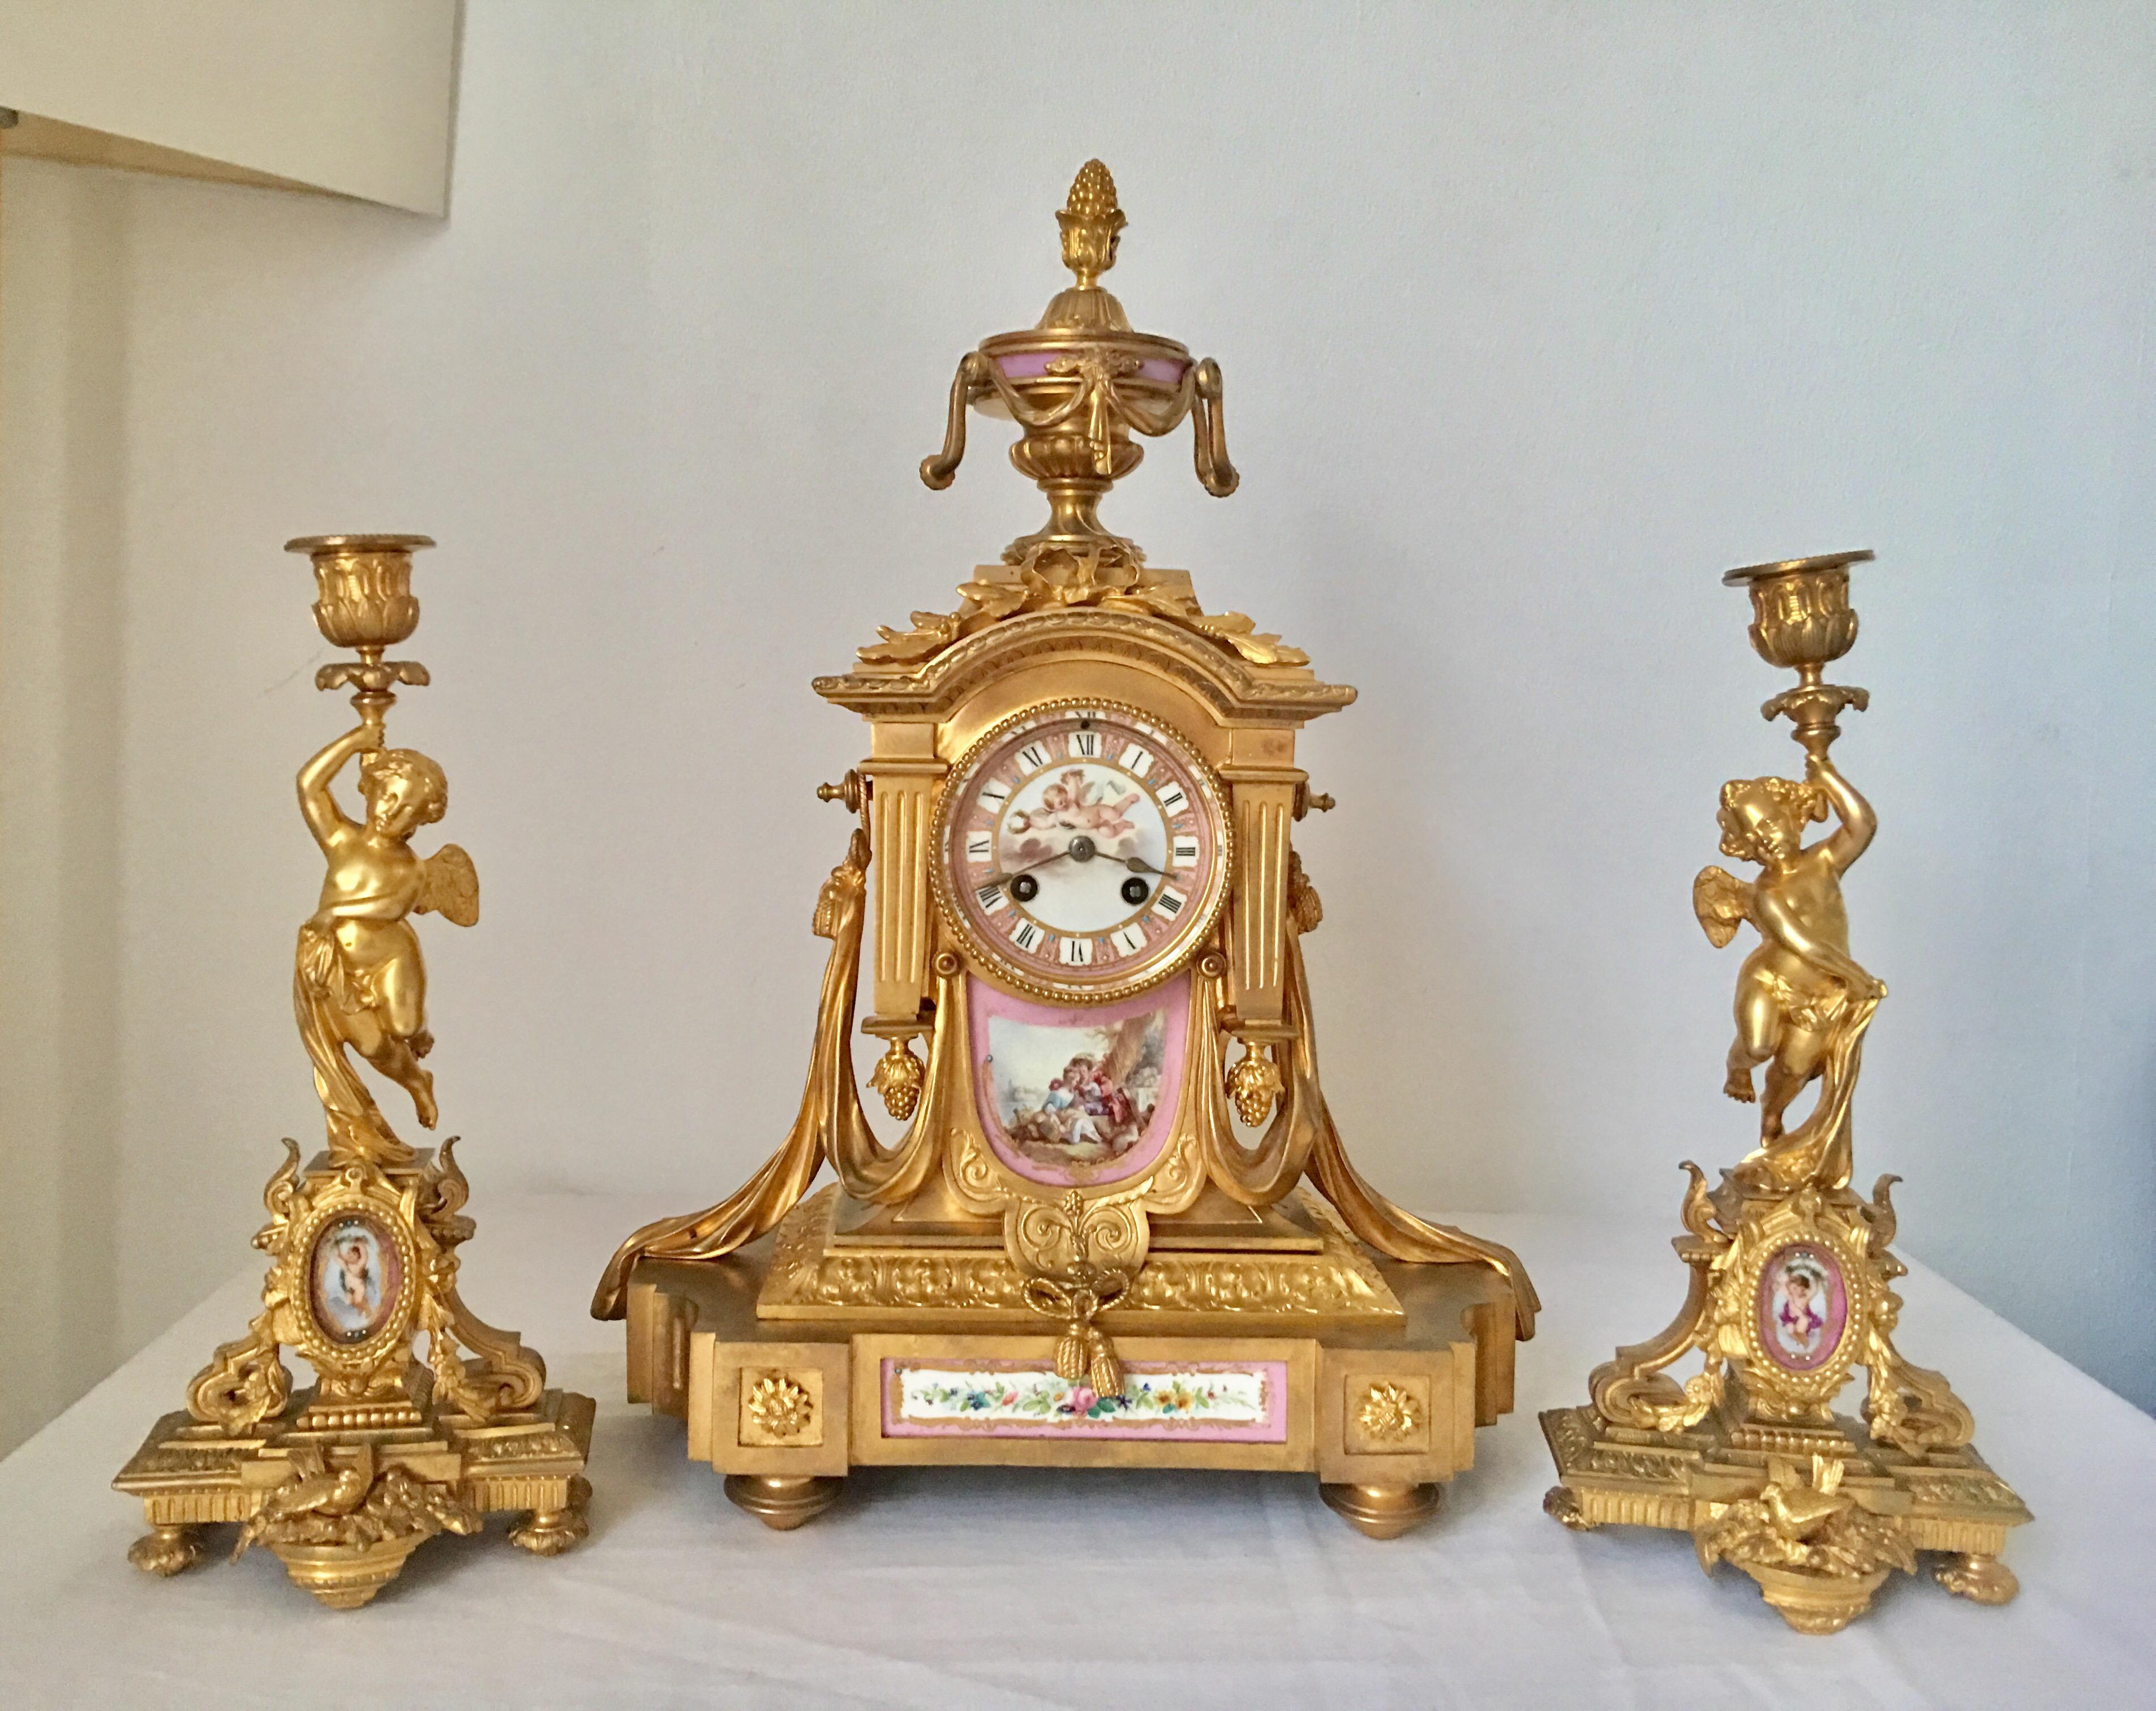 3pcs Set Porcelain Ormolu French Clock Signed Howell James & Co. “To the Queen” For Sale 7